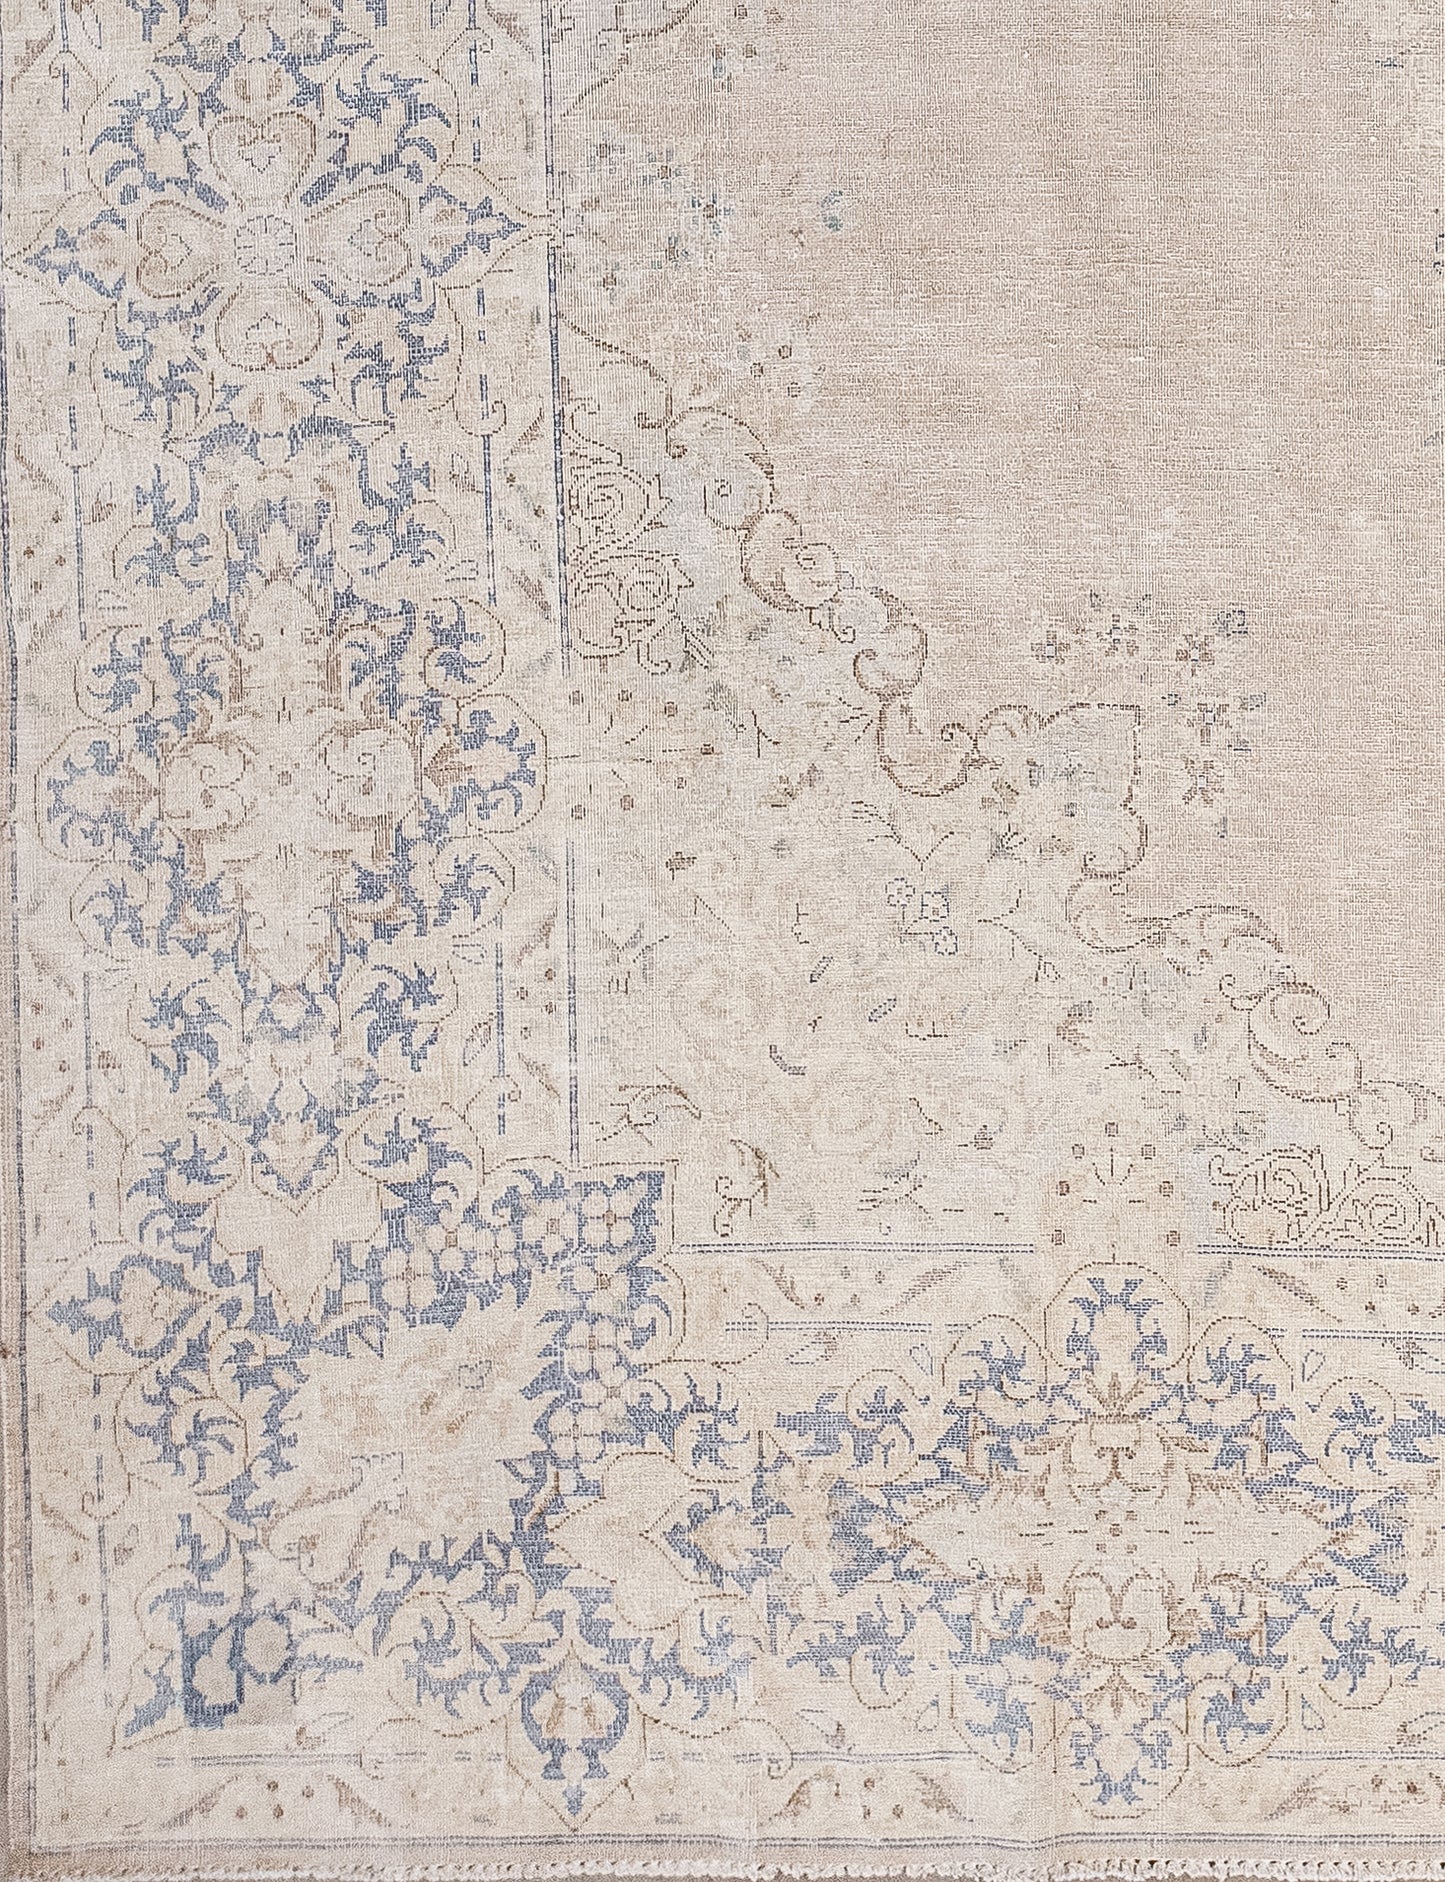 The thick stylish margin was woven with large ornaments, four-leaf clovers, crosses, and organic drawings.